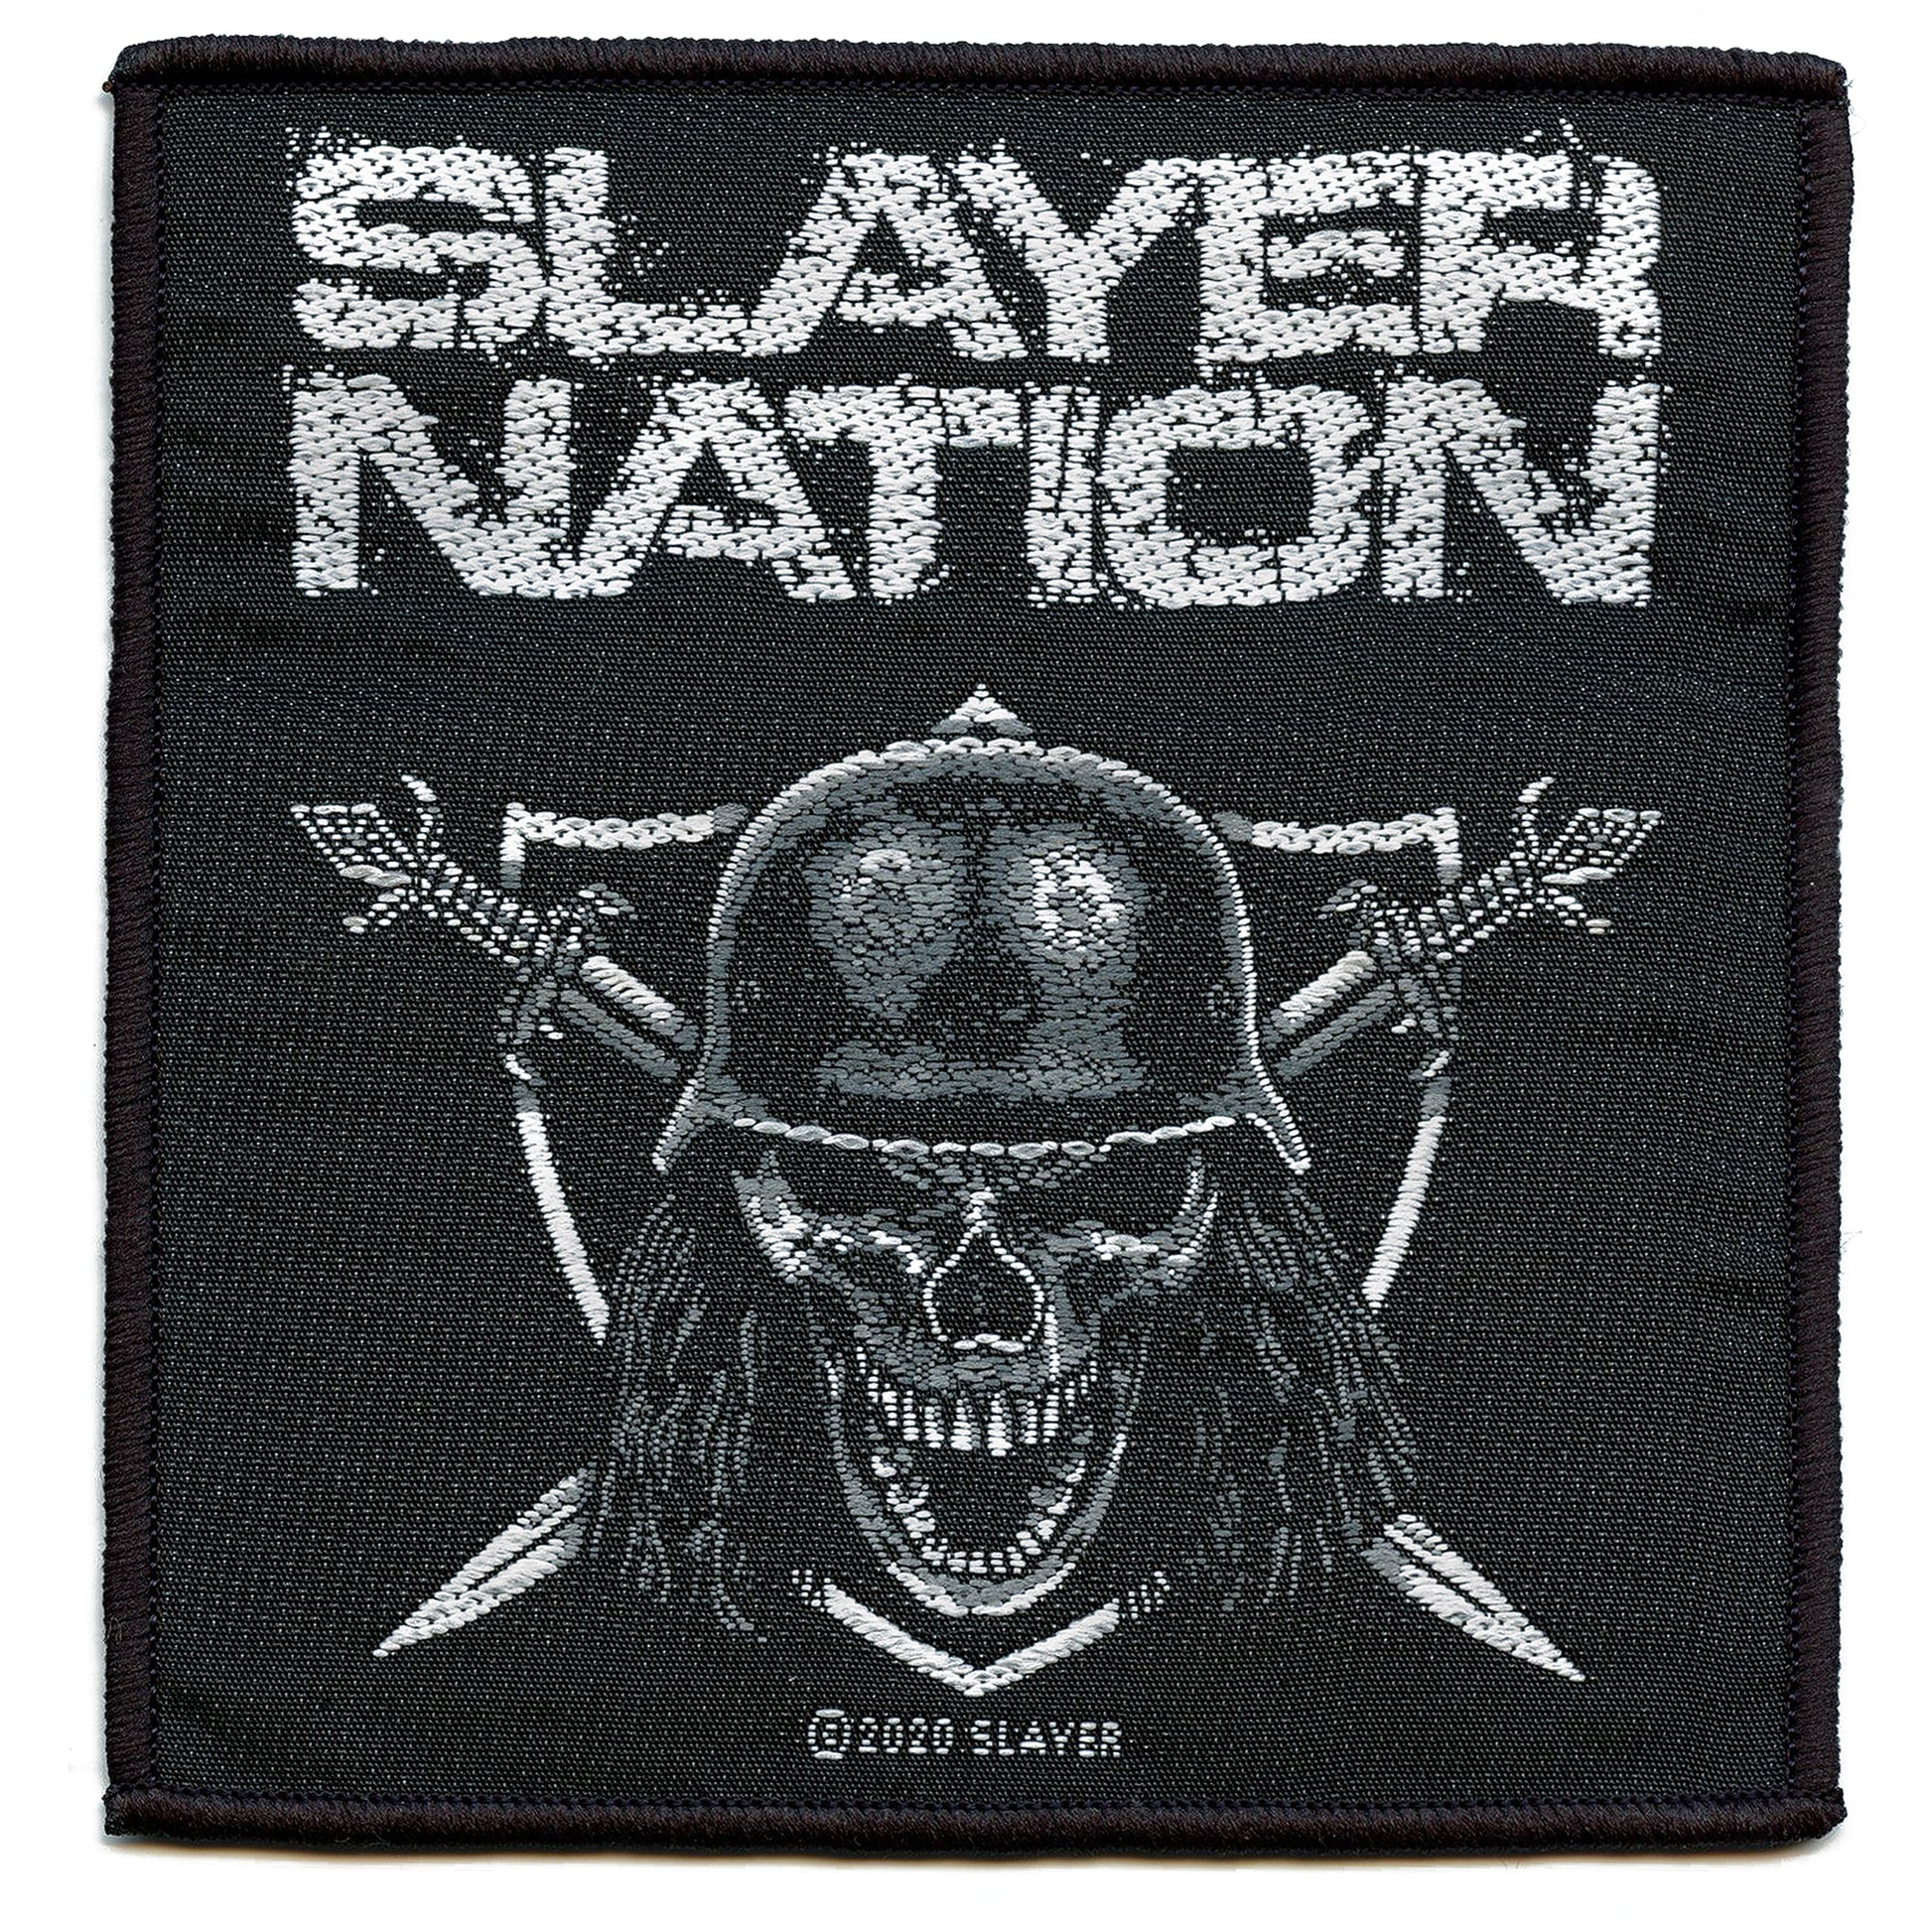 2020 Slayer Nation Woven Sew On Patch 